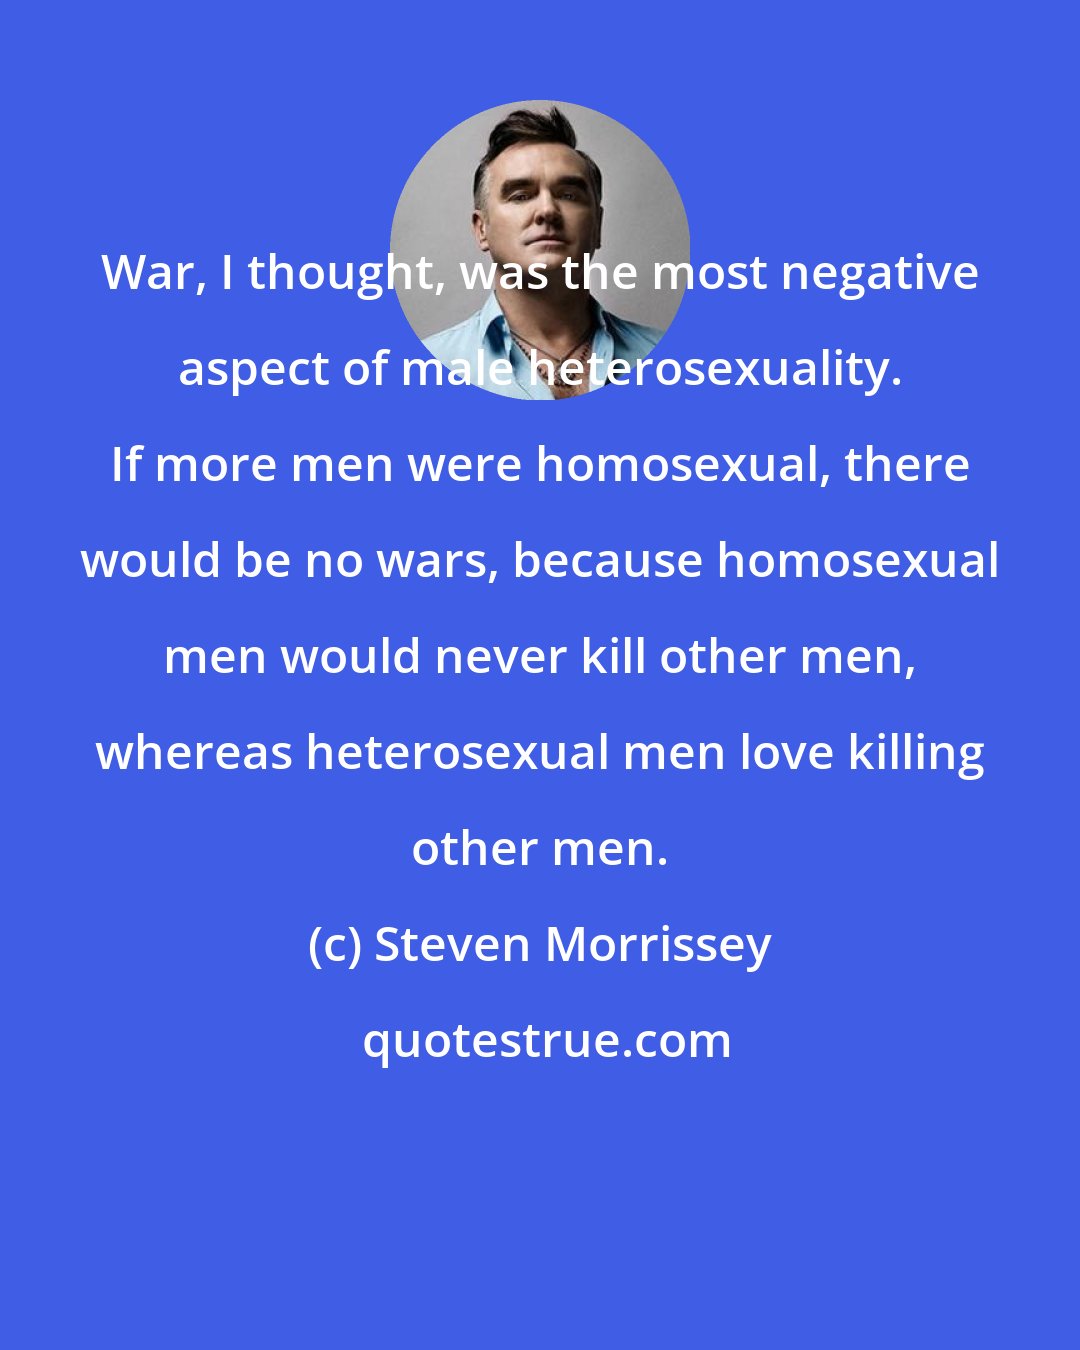 Steven Morrissey: War, I thought, was the most negative aspect of male heterosexuality. If more men were homosexual, there would be no wars, because homosexual men would never kill other men, whereas heterosexual men love killing other men.